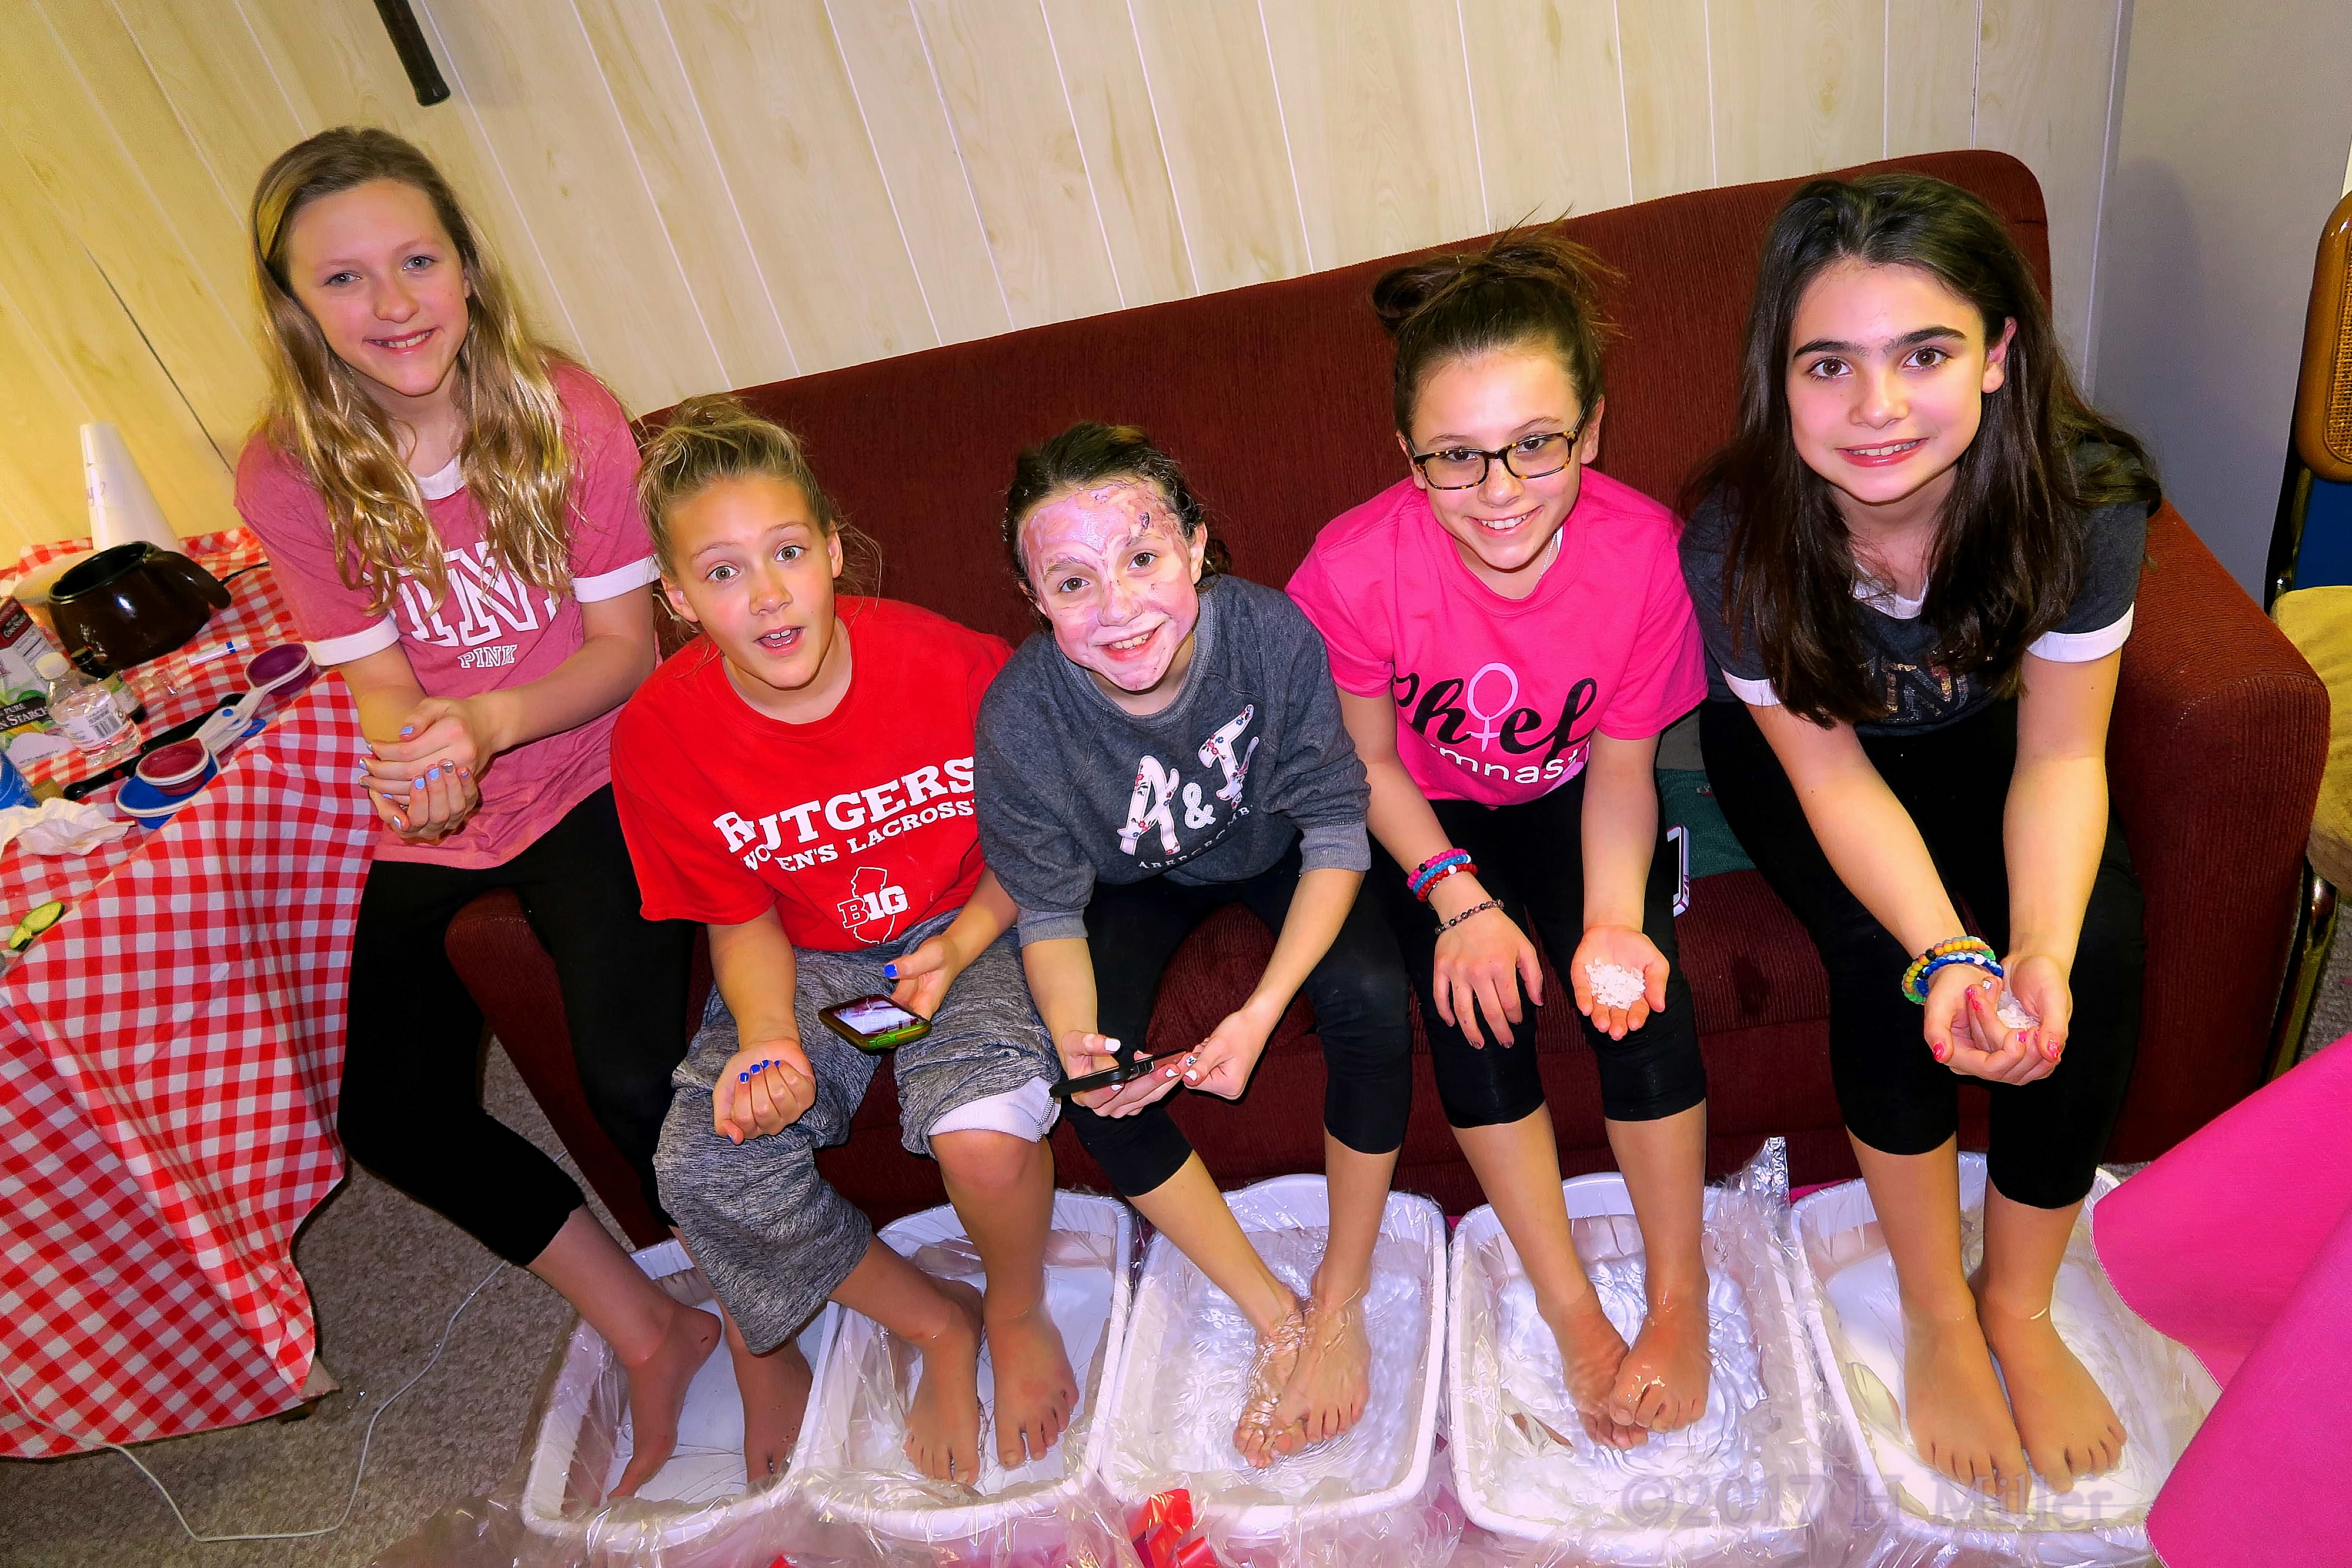 Kids Pedicures Are Much More Fun With Friends! 4